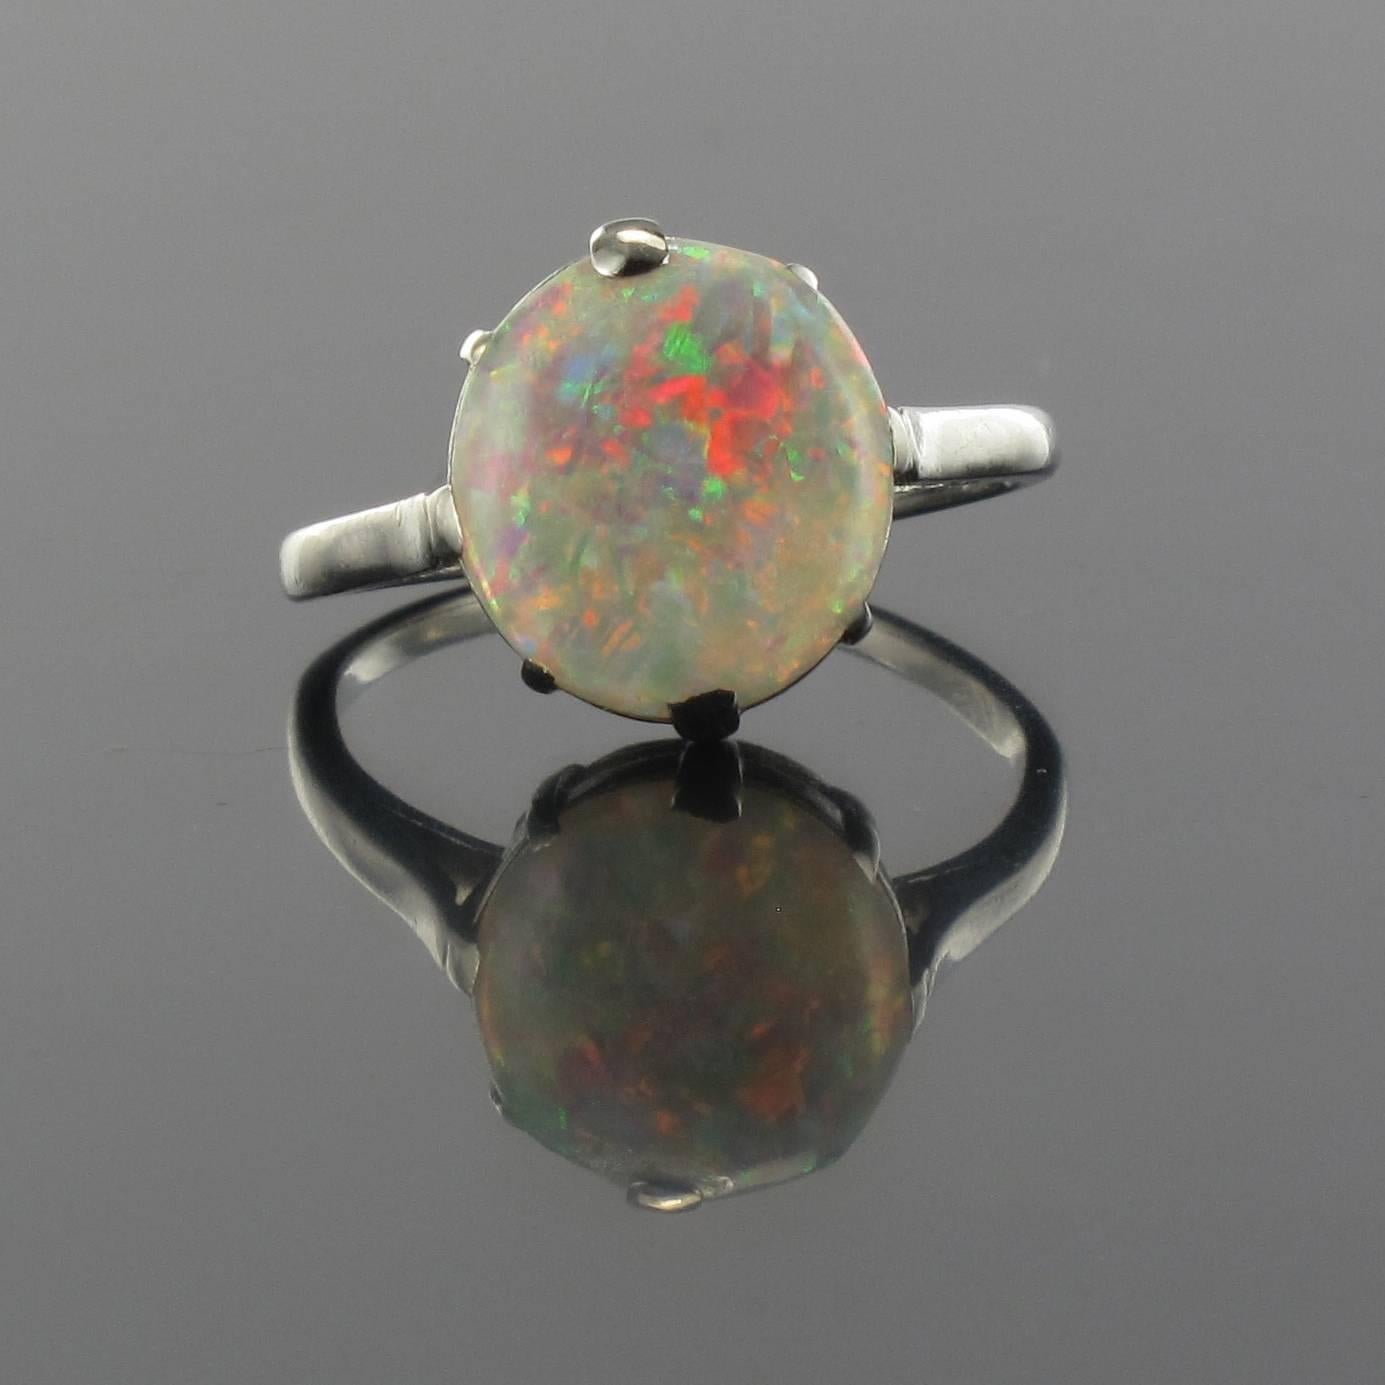 Platinum ring, dog's head hallmark.

This stunning ring is claw set with a natural opal cabochon that is slightly oval in shape. The ring bed is openwork thereby allowing light to enter and illuminate the opal. 

Total weight of the opal: 1.70